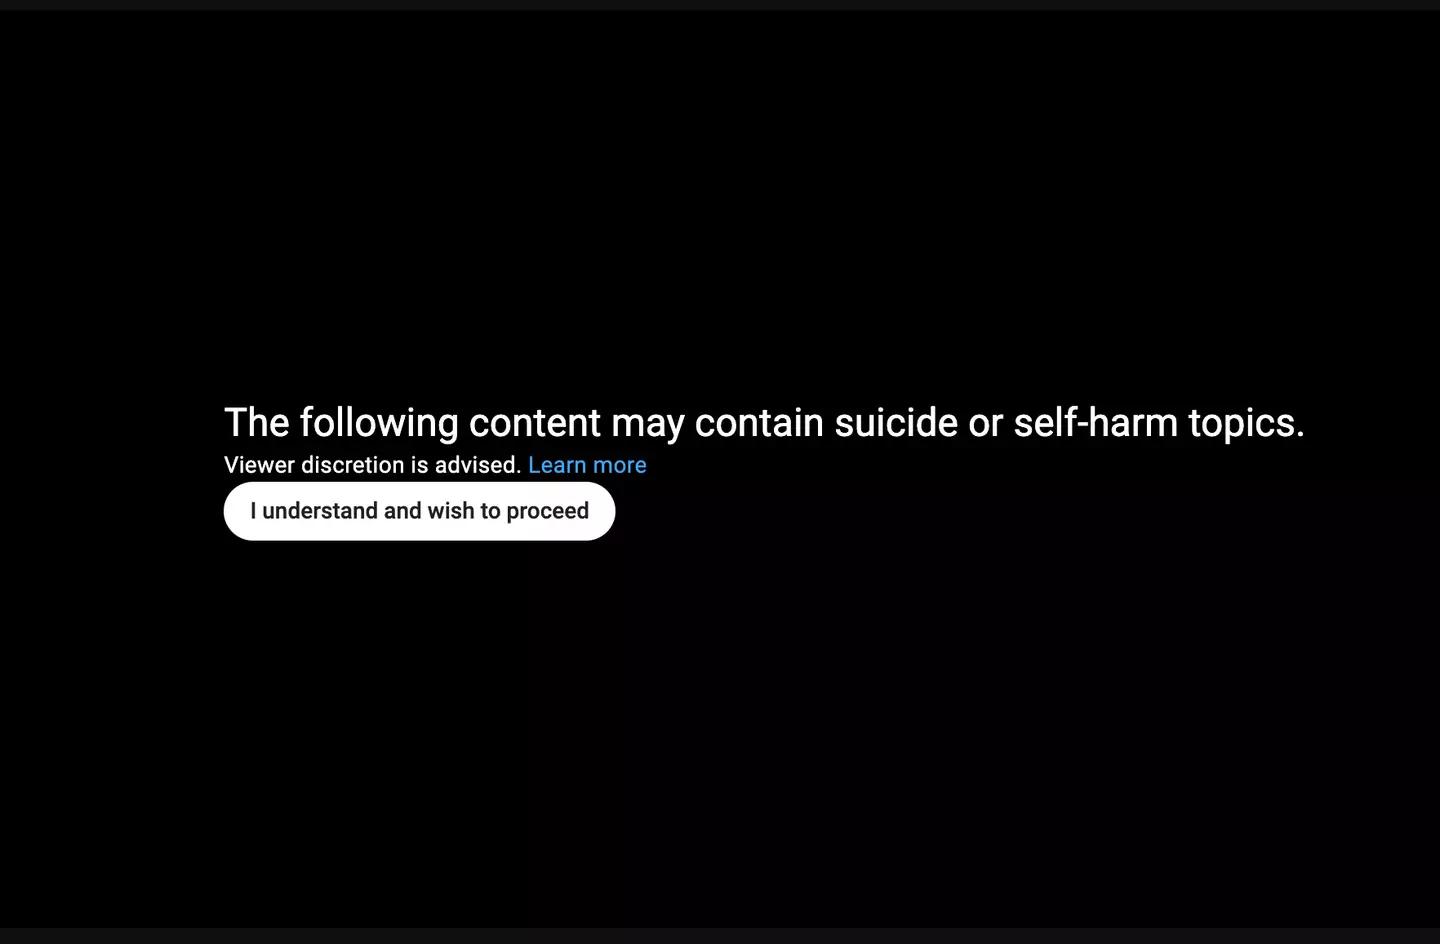 A YouTube account who shared the scene has included a content warning.